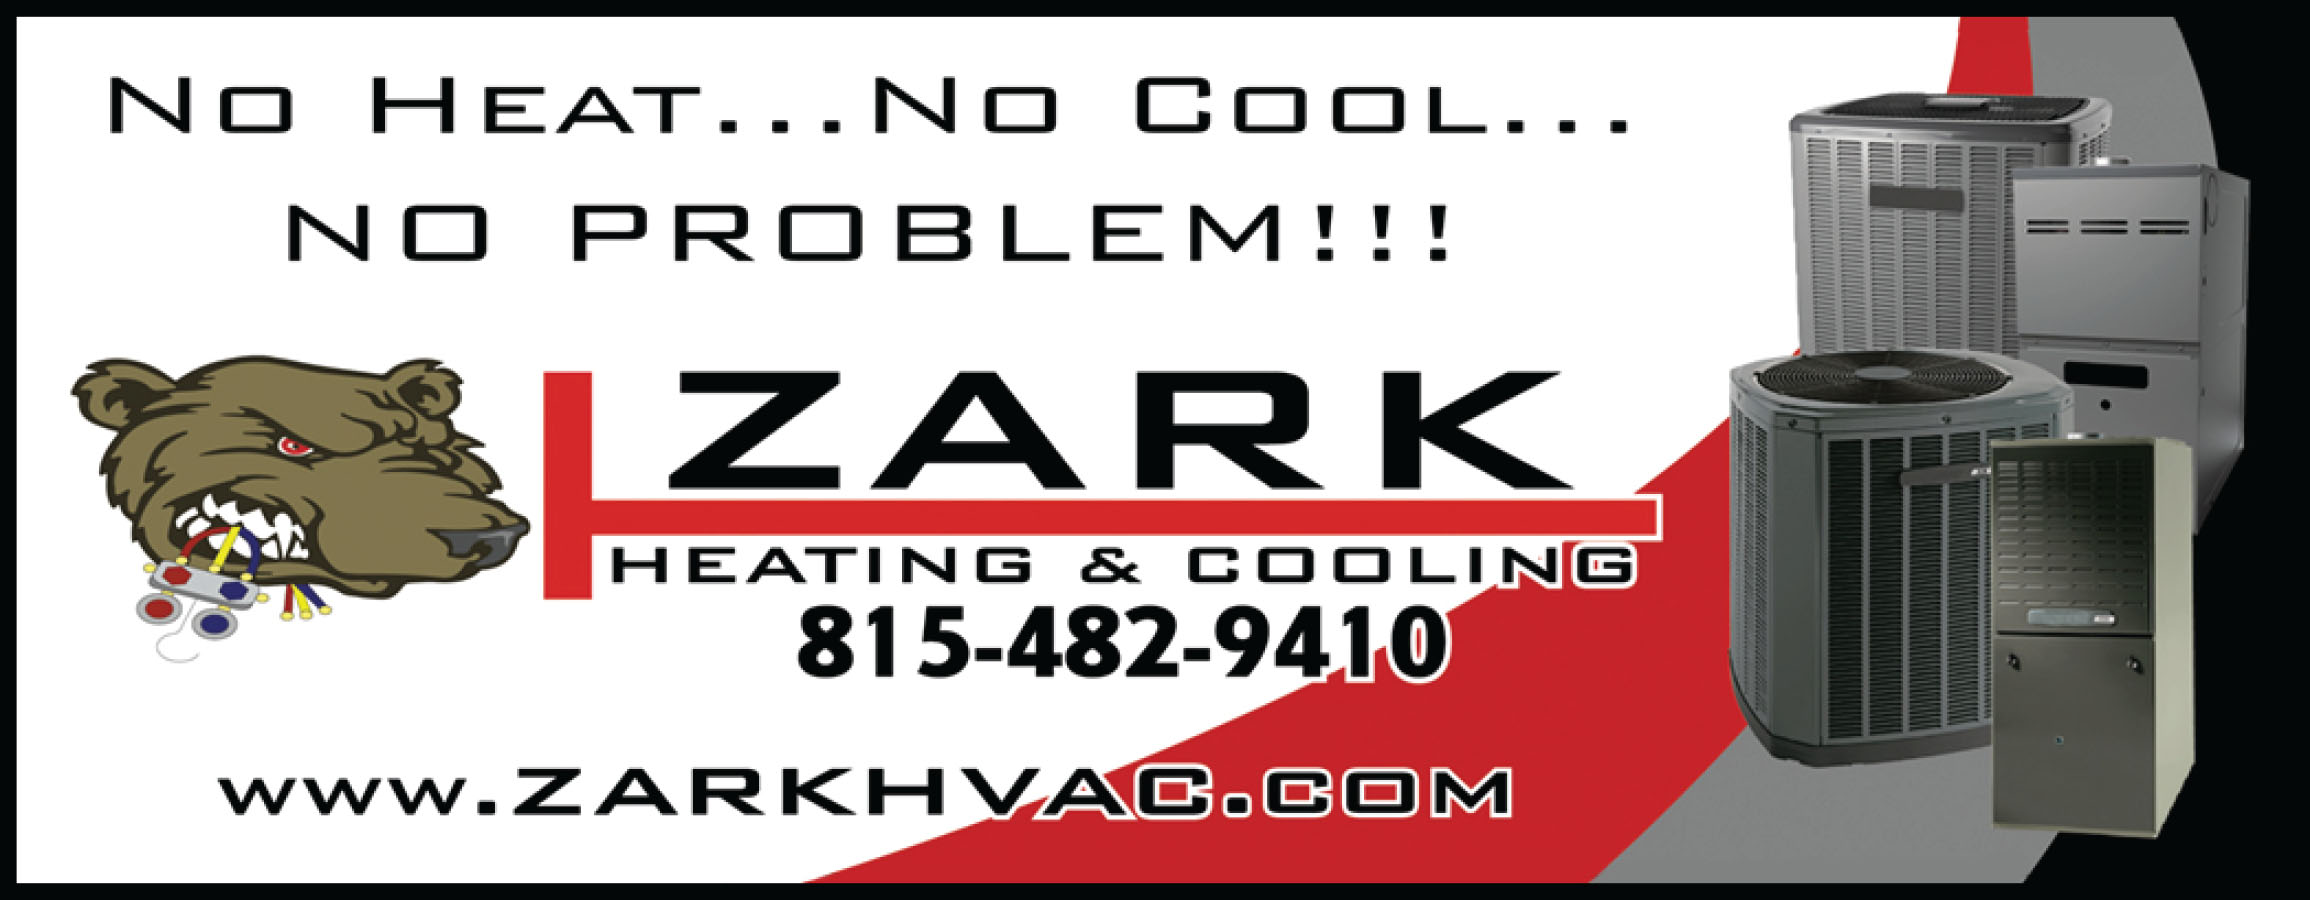 Zark Heating and Cooling copy